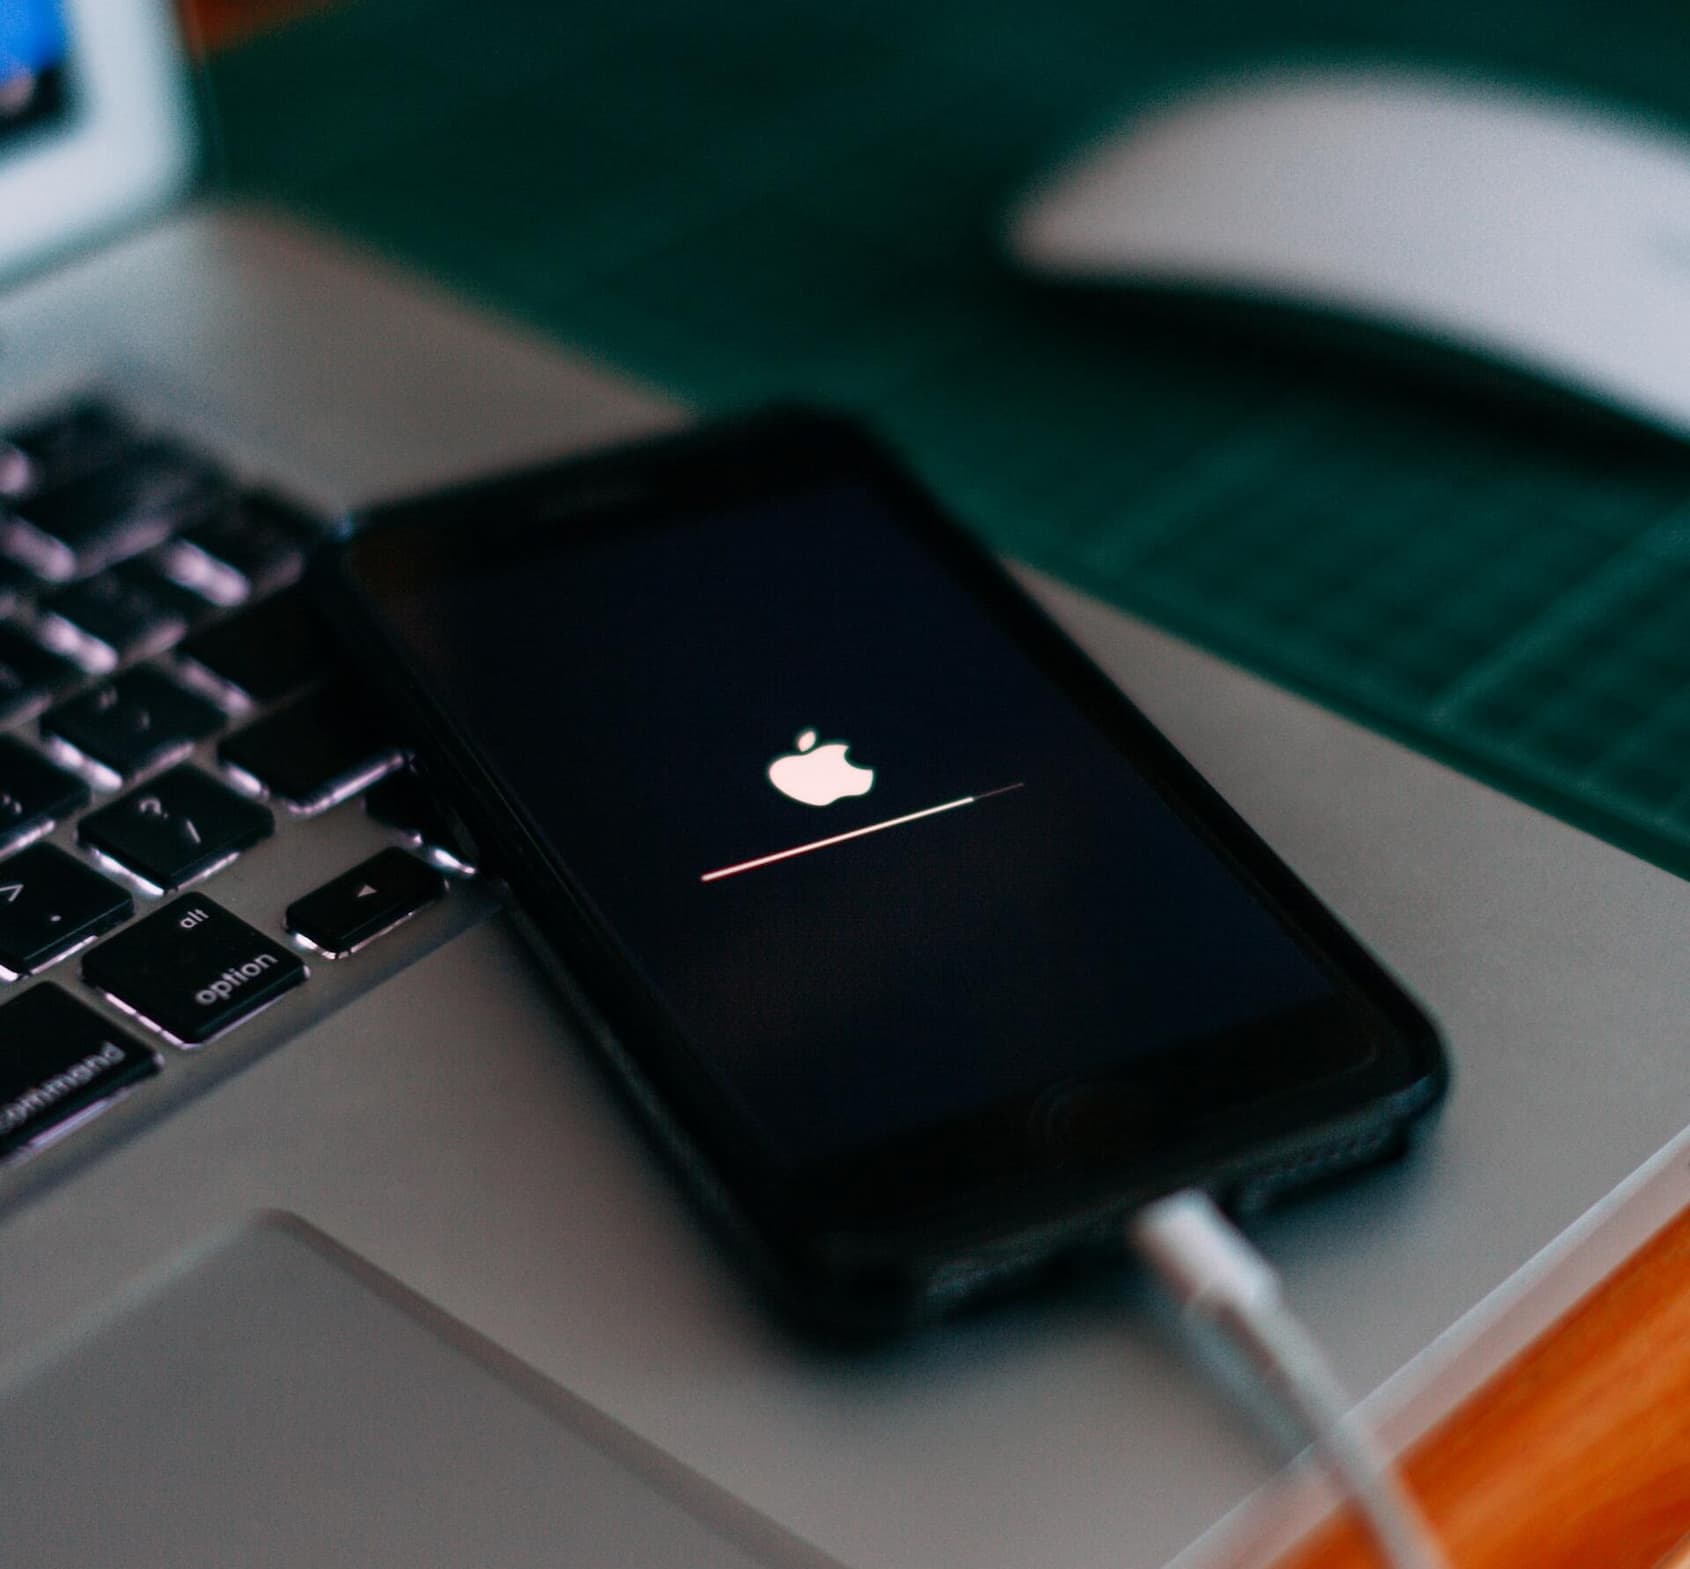 Updating the IOS operating system for our devices helps to address security vulnerabilities